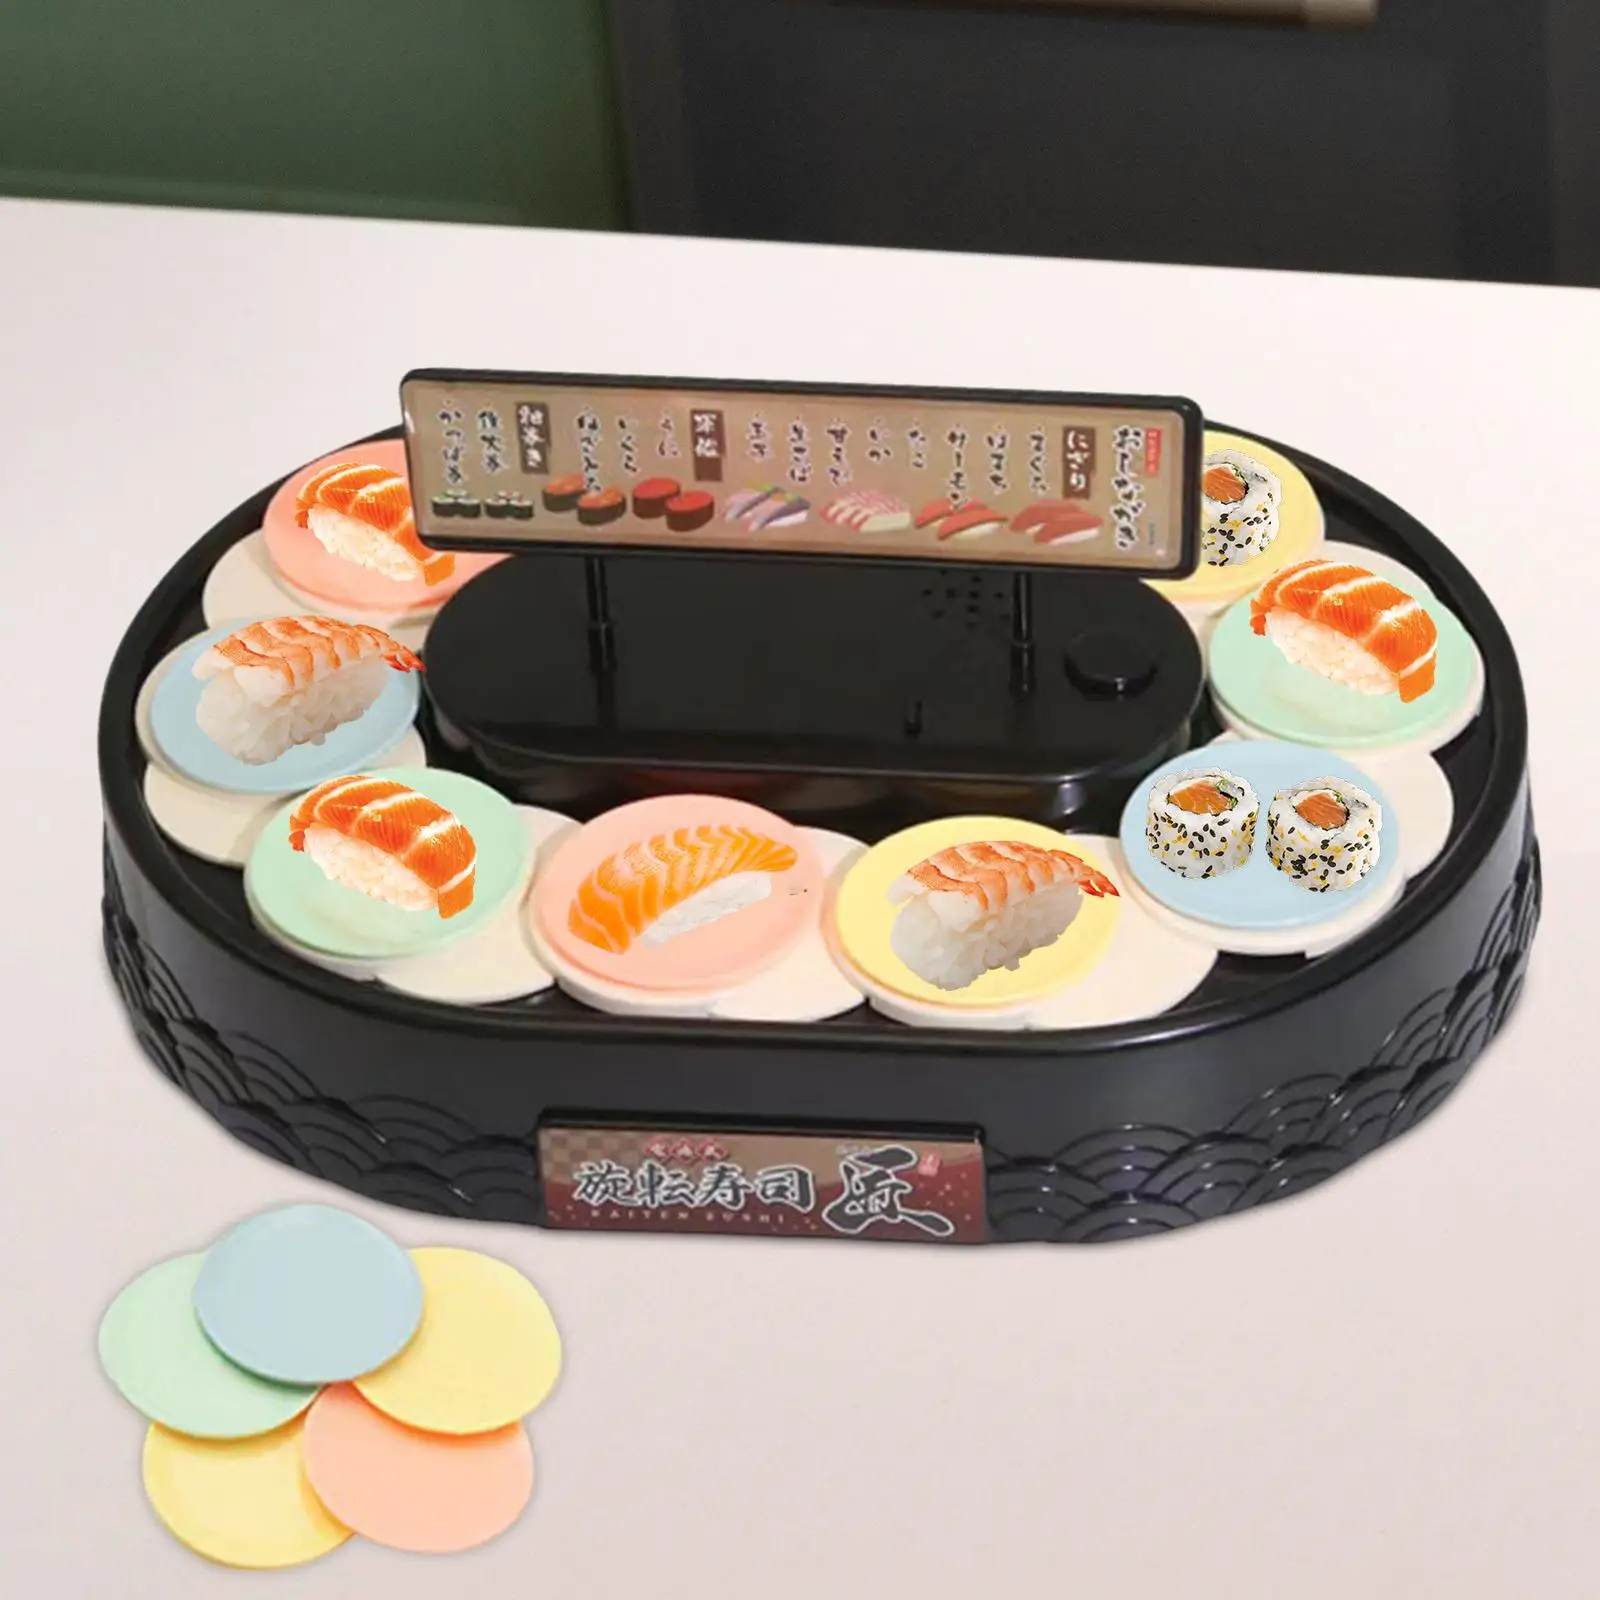 Sushi Machine Dessert Stand Electric with Serving Trays Rotating Cupcake Display Stand for Desserts Jewelry Sushi